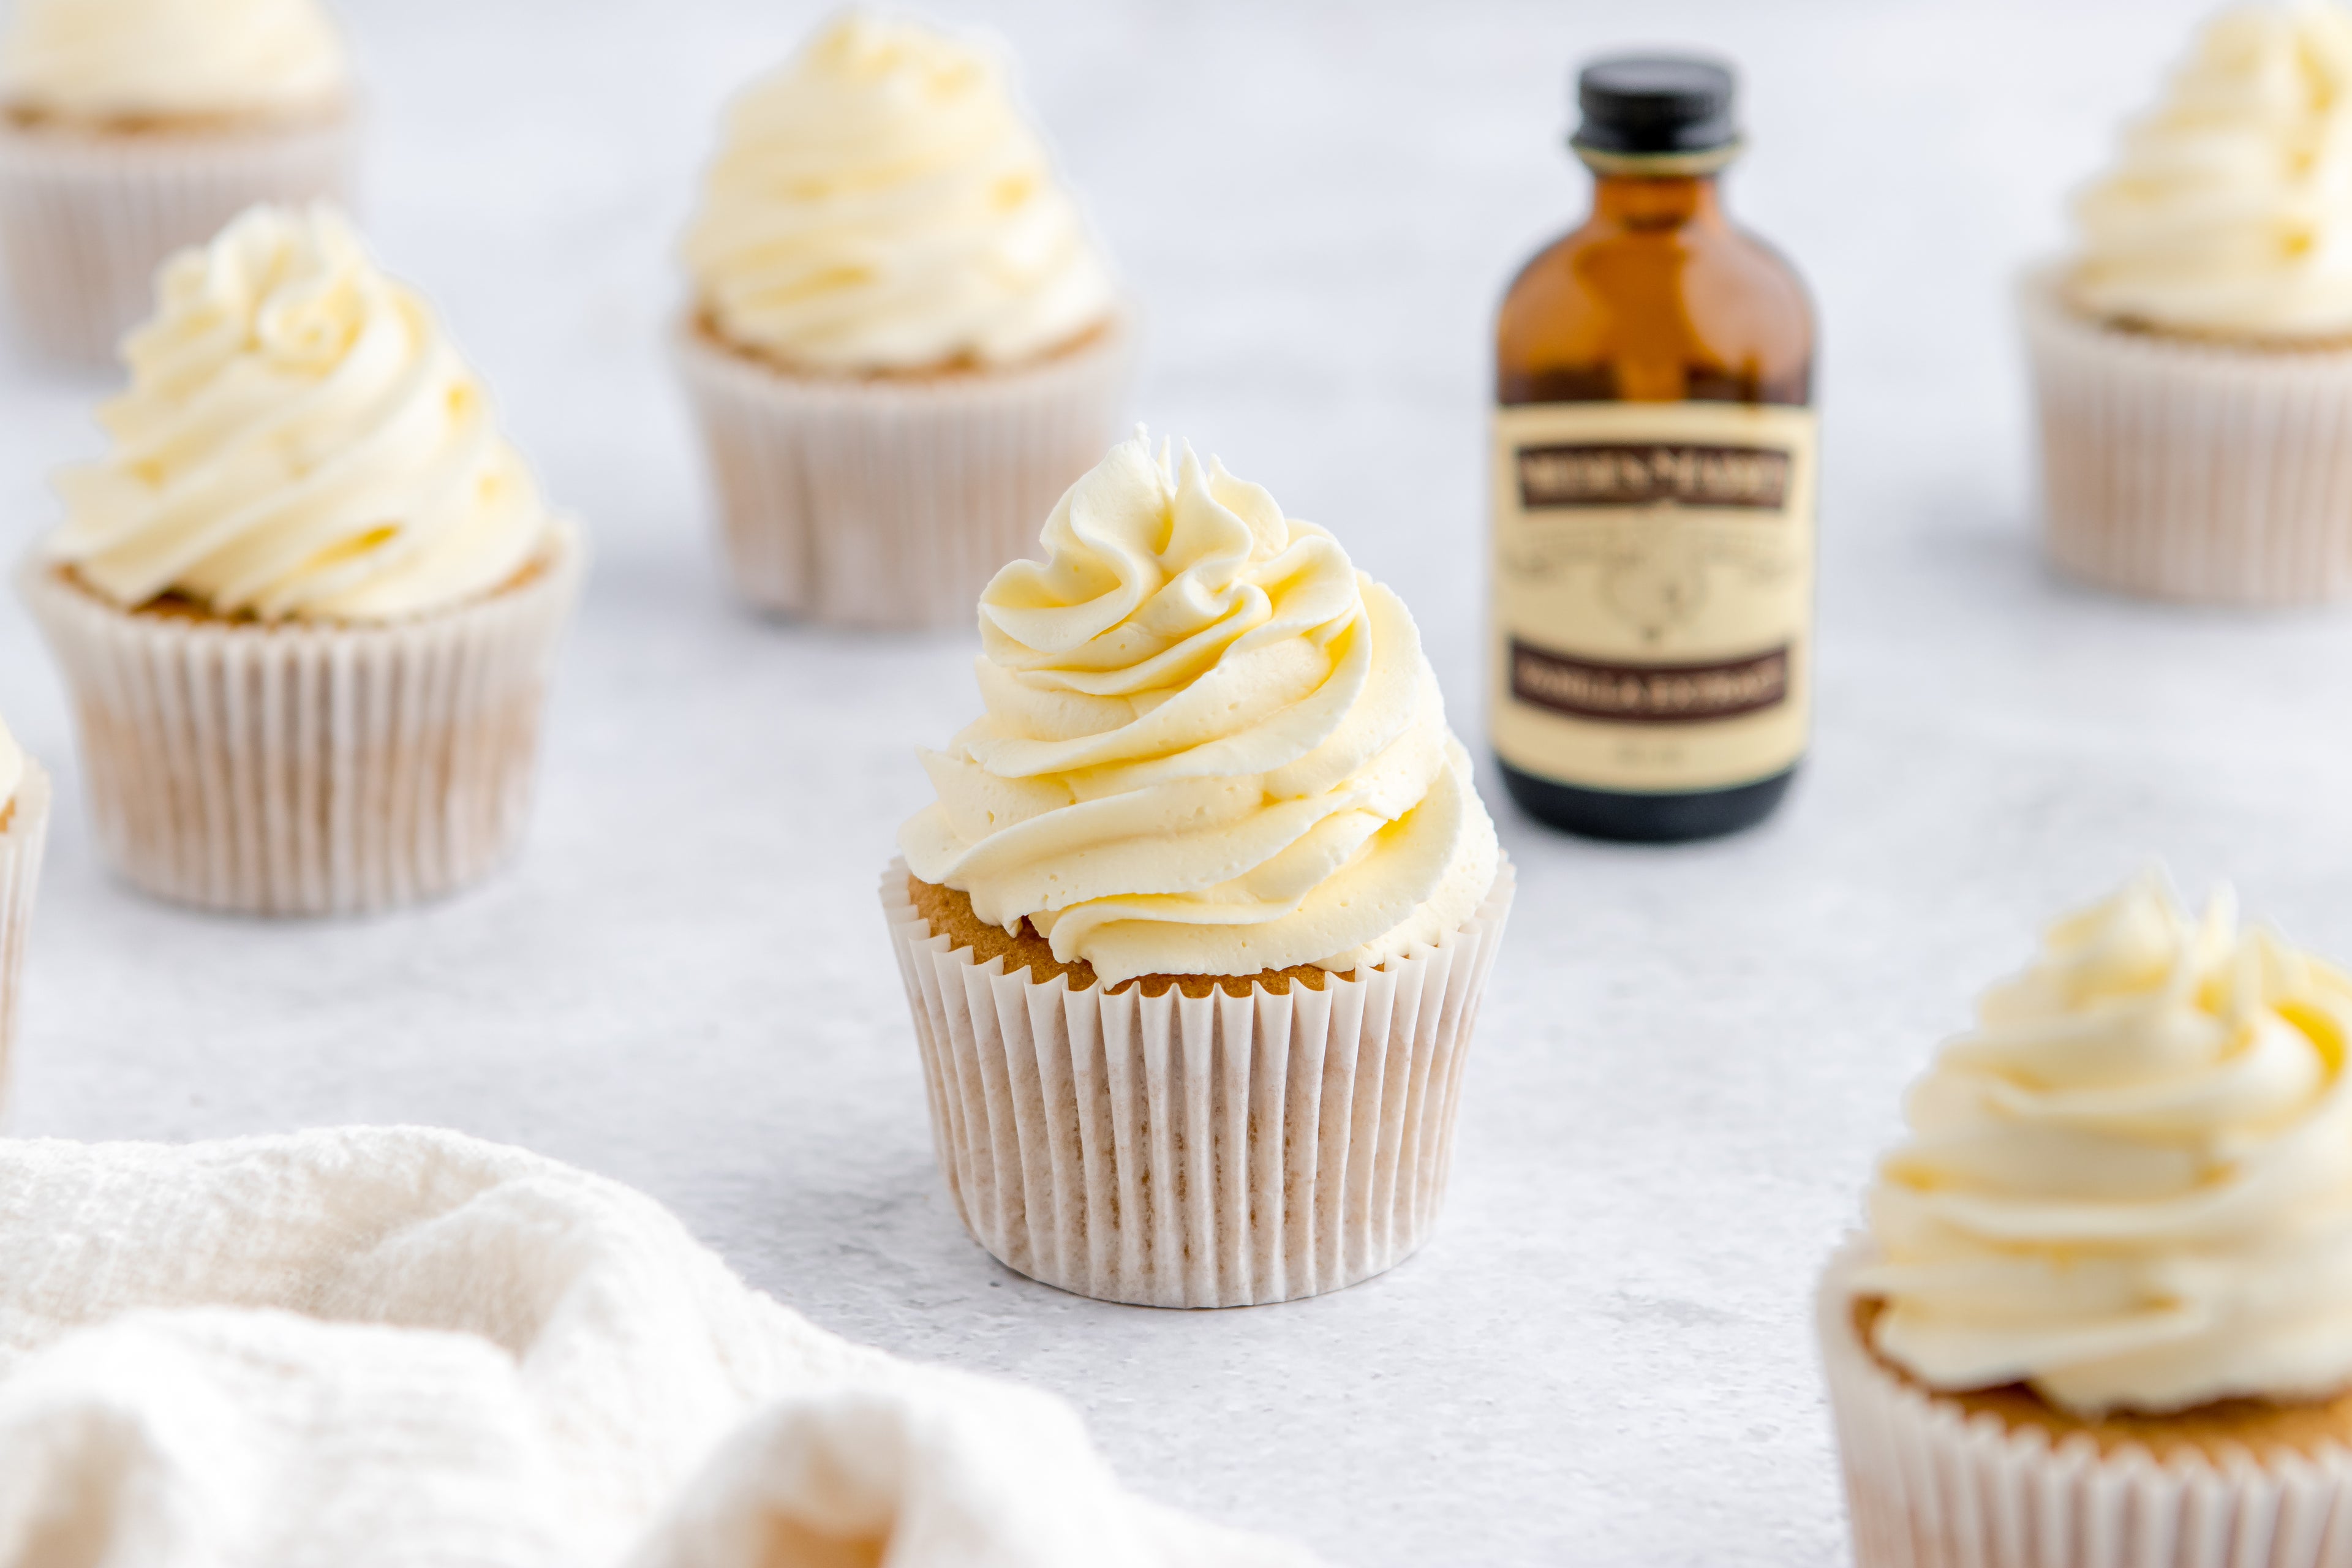 Close up of a Gluten Free Cupcake with a bottle of Neilsen-Massey vanilla extract in the background